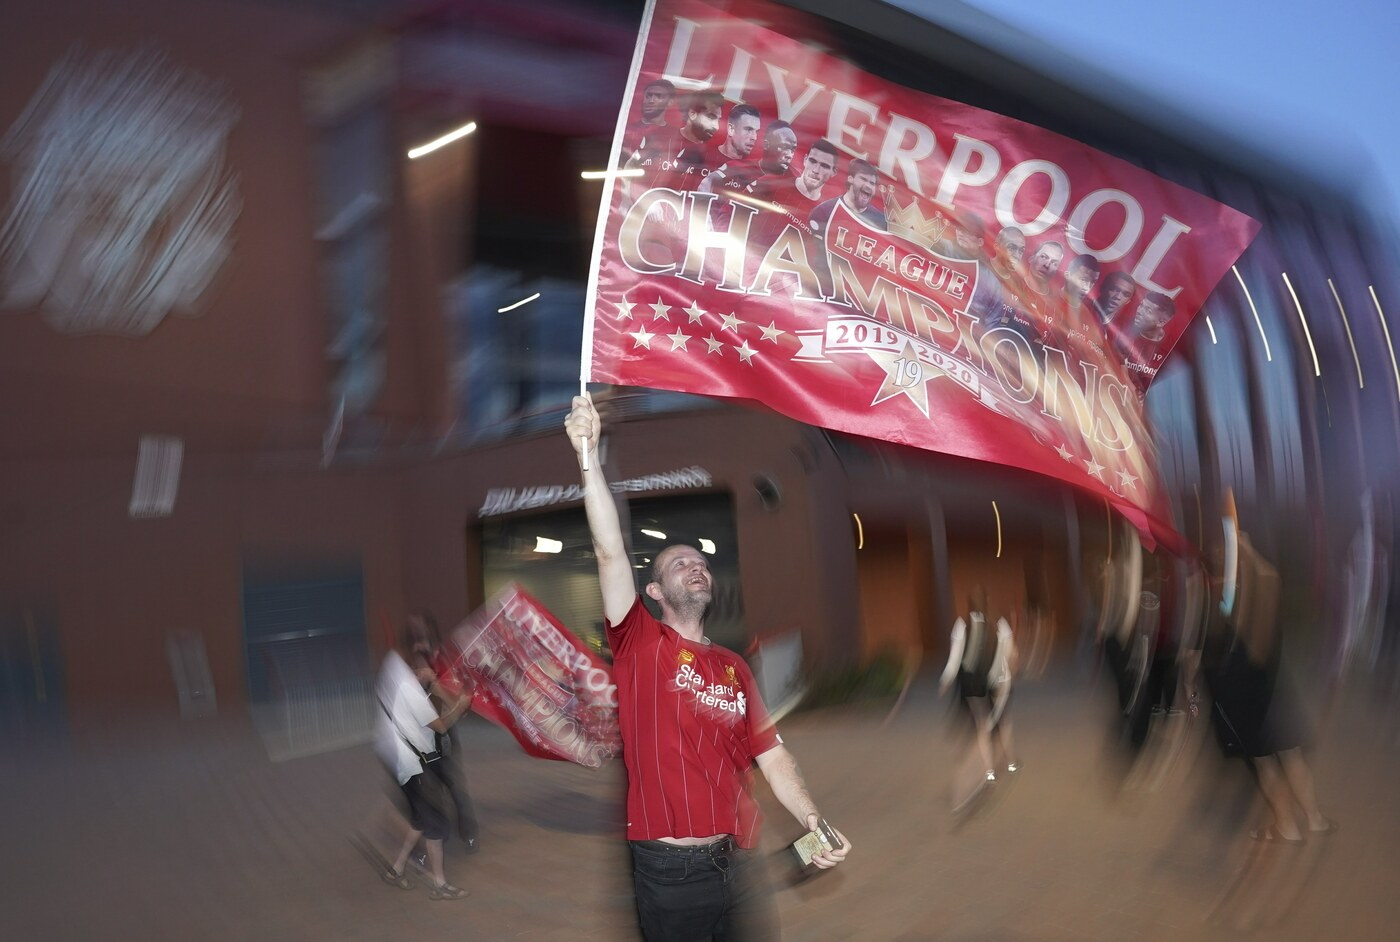 A Liverpool supporter celebrates outside Anfield Stadium in Liverpool, England, Thursday, June 25, 2020 after hearing Chelsea had scored in the English Premier League soccer match between Chelsea and Manchester City. Liverpool will be crowned Premier League champions if Manchester City fail to beat Chelsea. (AP Photo/Jon Super)